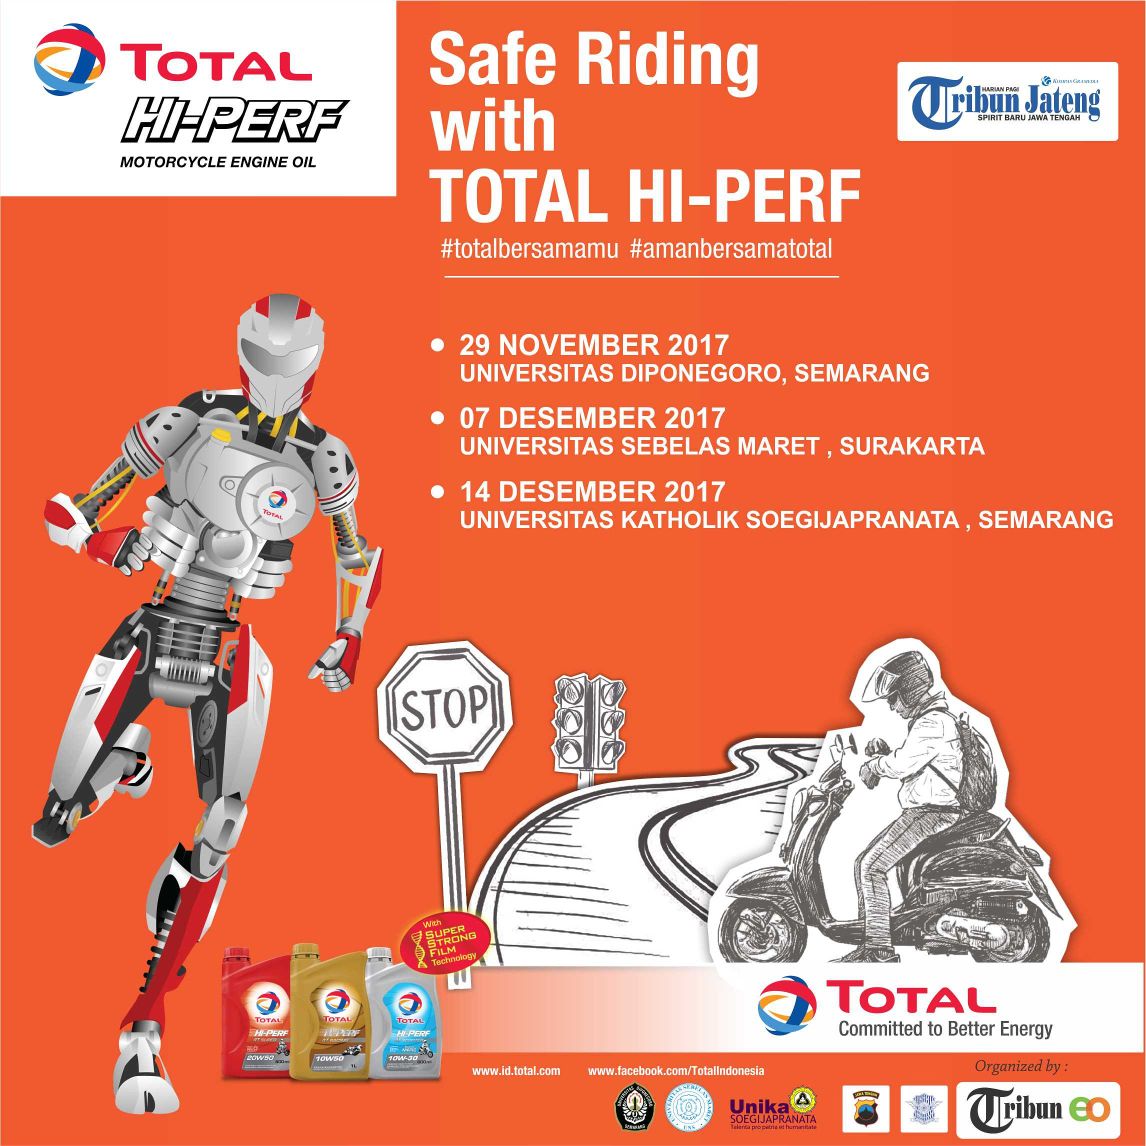 SEMARANG - SOLO EVENT : SAFE RIDING WITH TOTAL HI-PERF